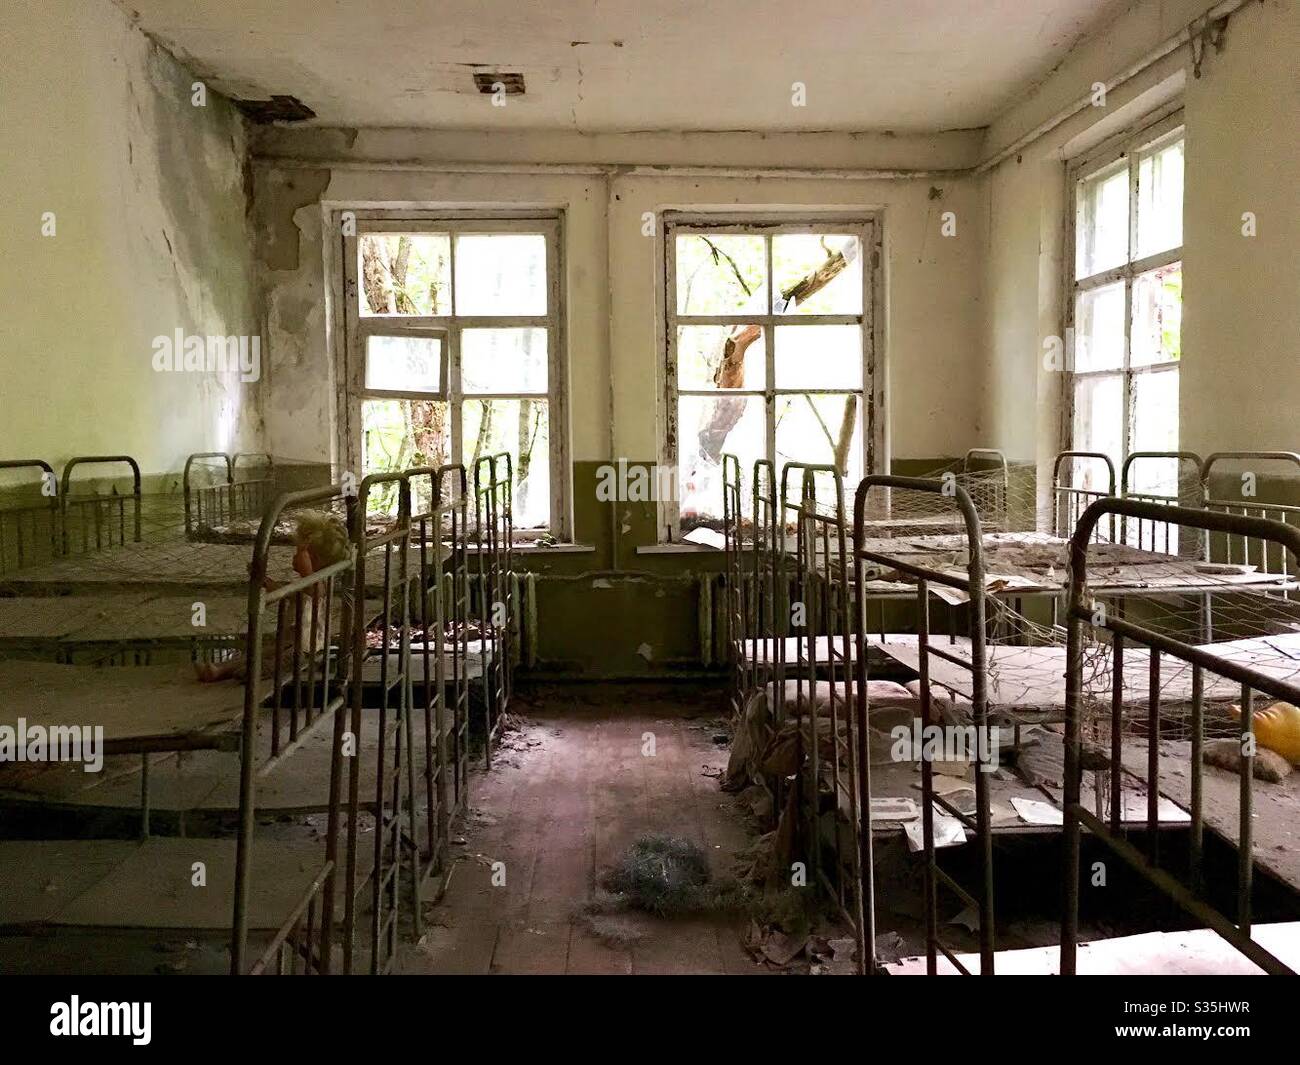 Chernobyl Ukraine dormitory in a public school room in the town of Pripyat after the nuclear disaster in 1986 Stock Photo